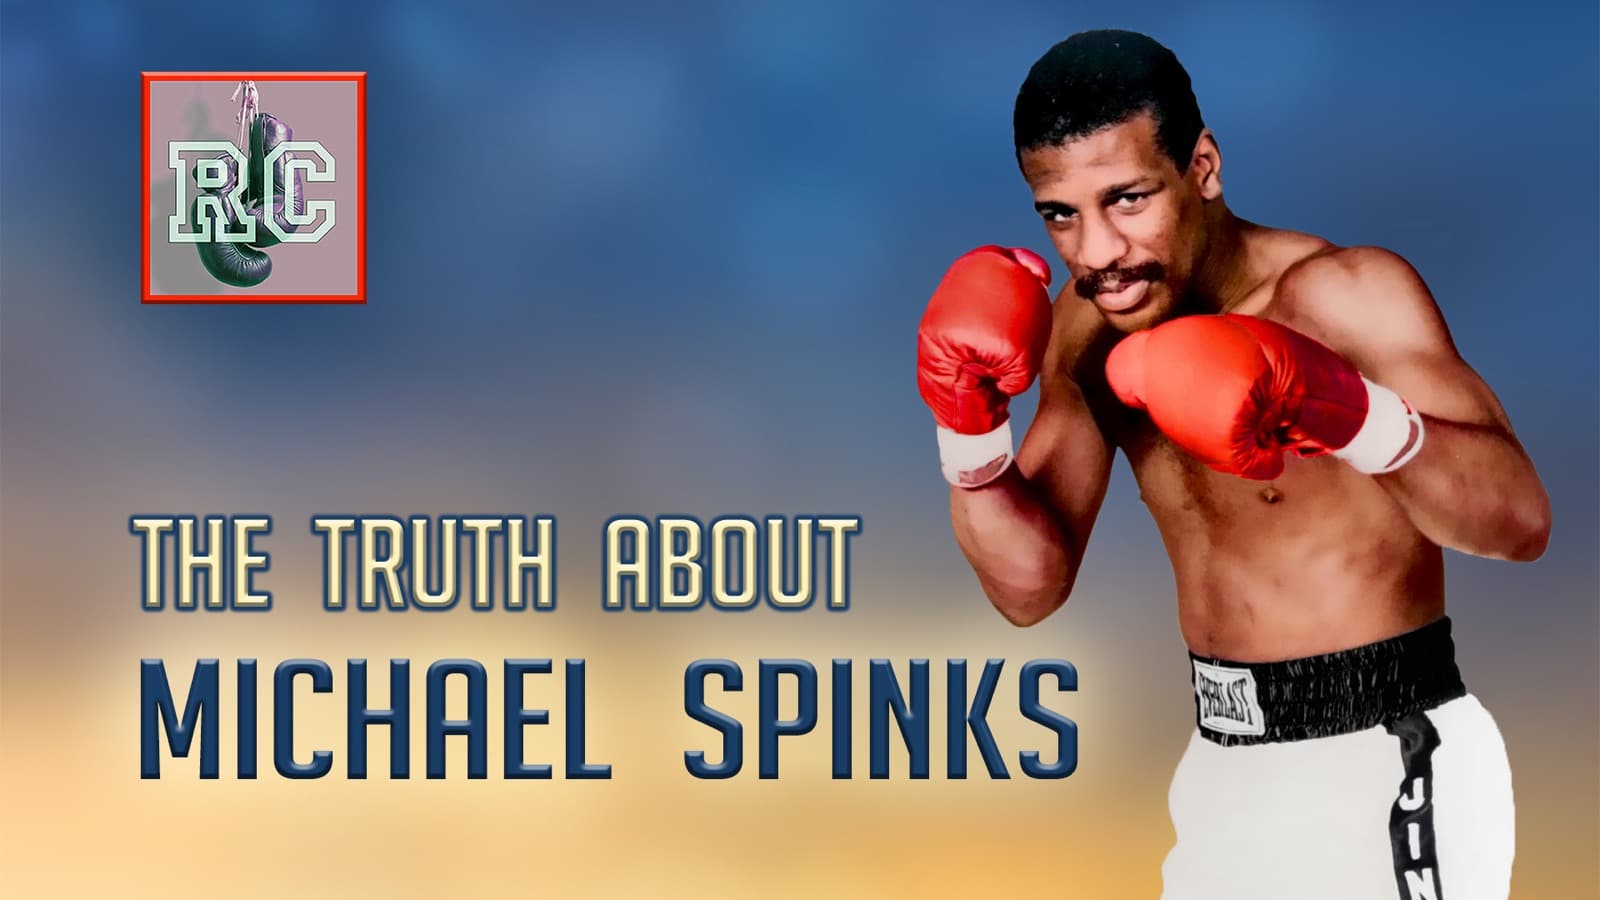 VIDEO: The truth about Michael Spinks